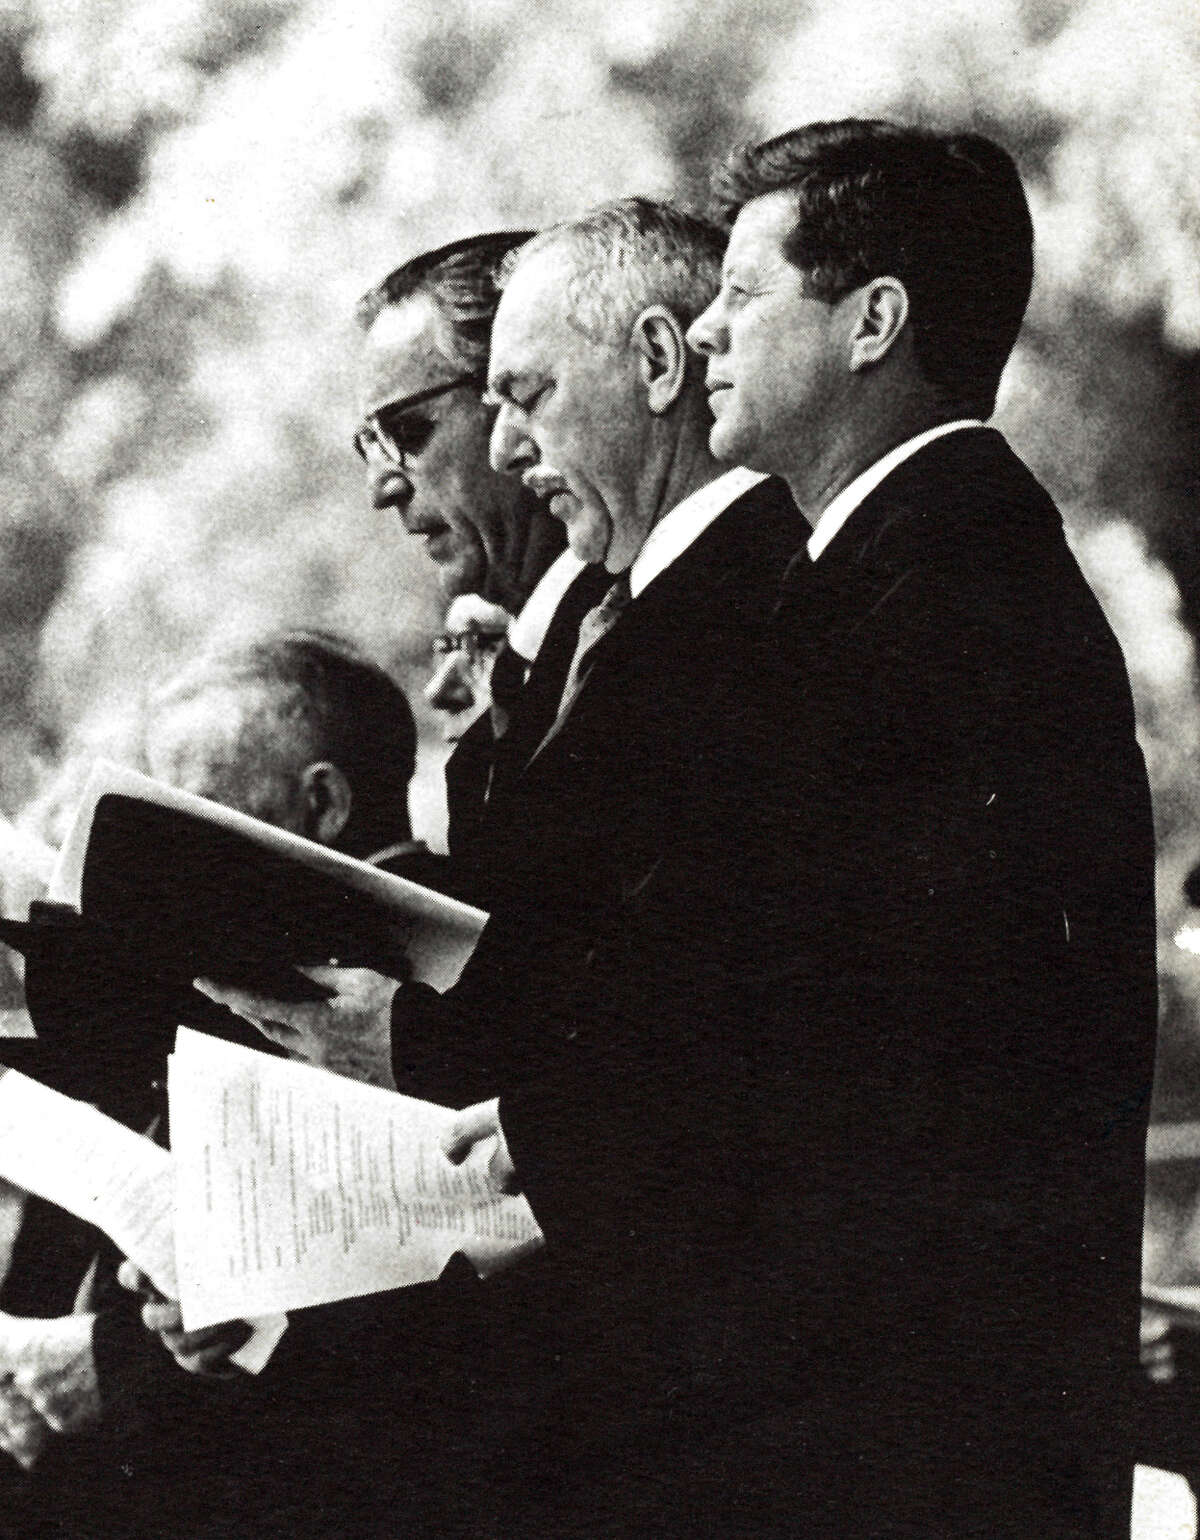 Kennedy in Connecticut - President John F. Kennedy receives an honorary degree from Yale University, in New Haven, in 1962.